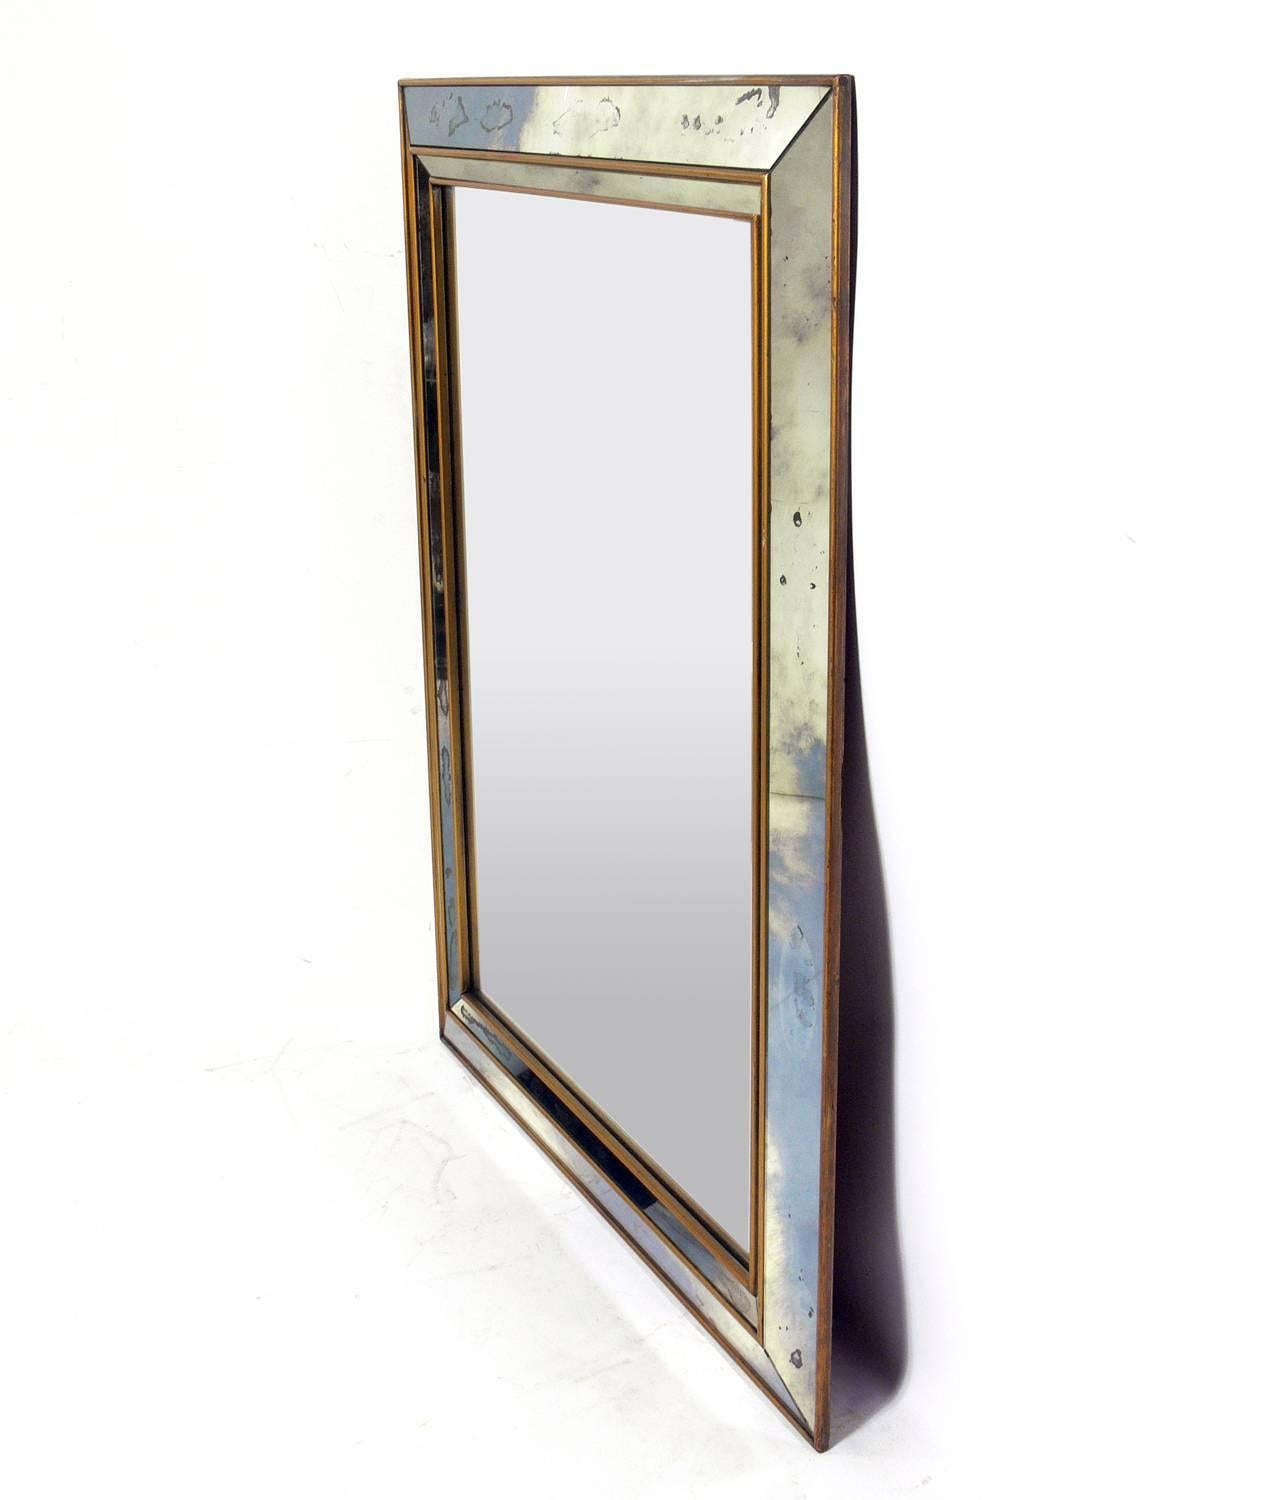 Gold and mirror framed mirror, American, circa 1940s. It retains it's warm patina throughout.